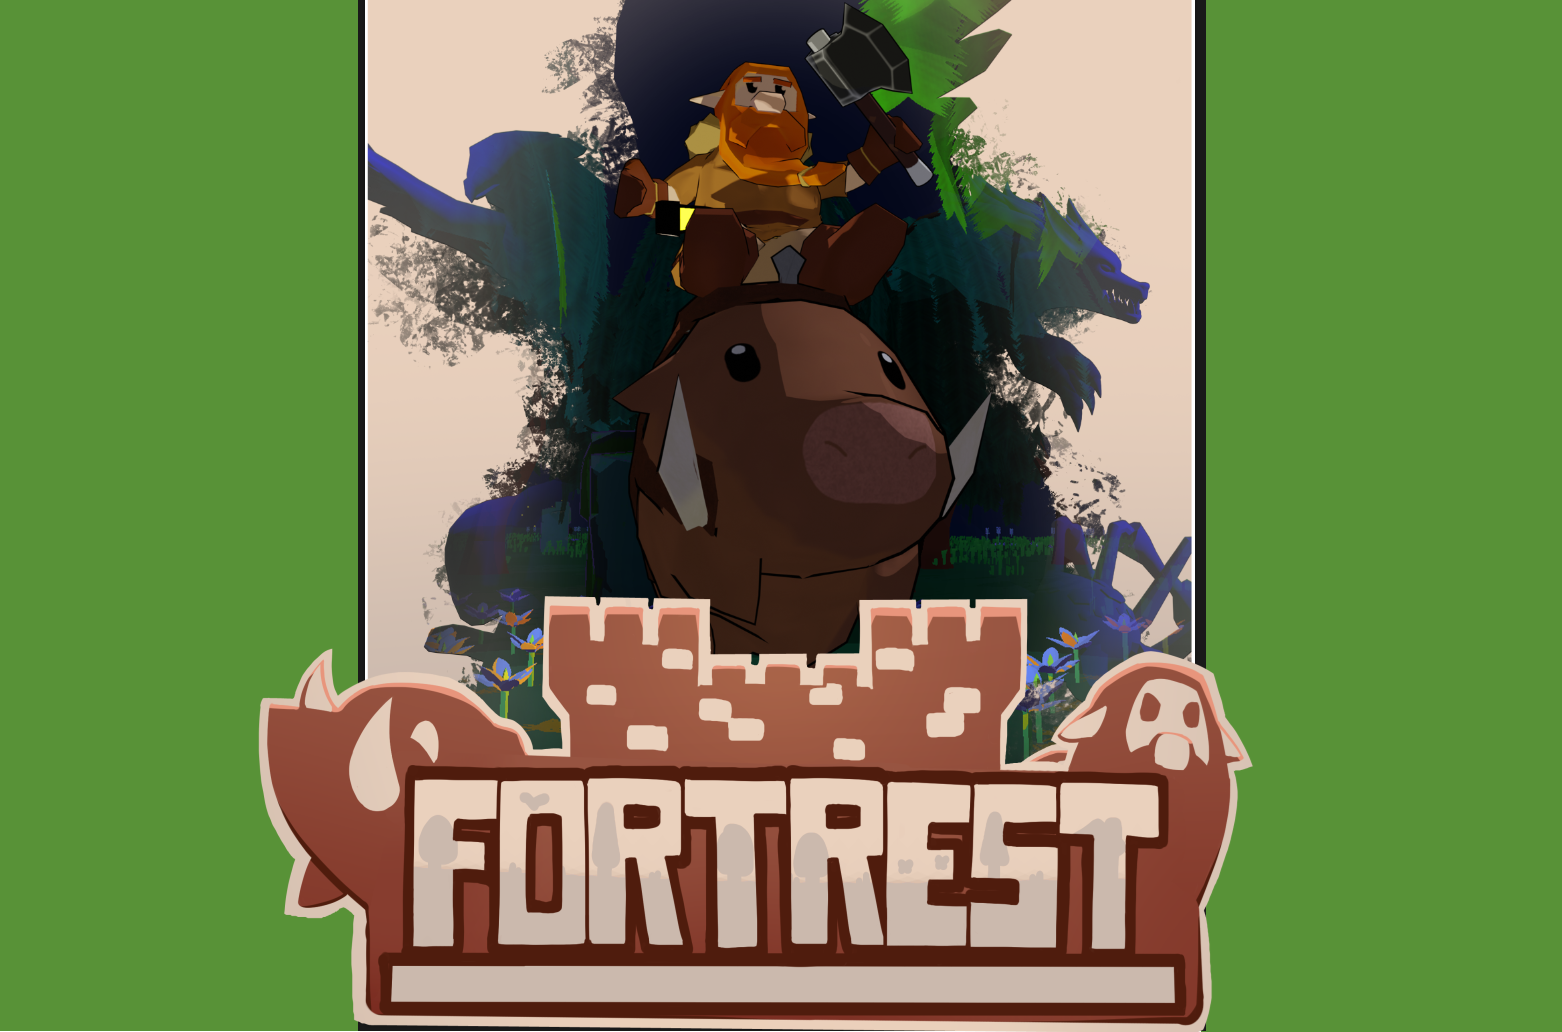 Fortrest